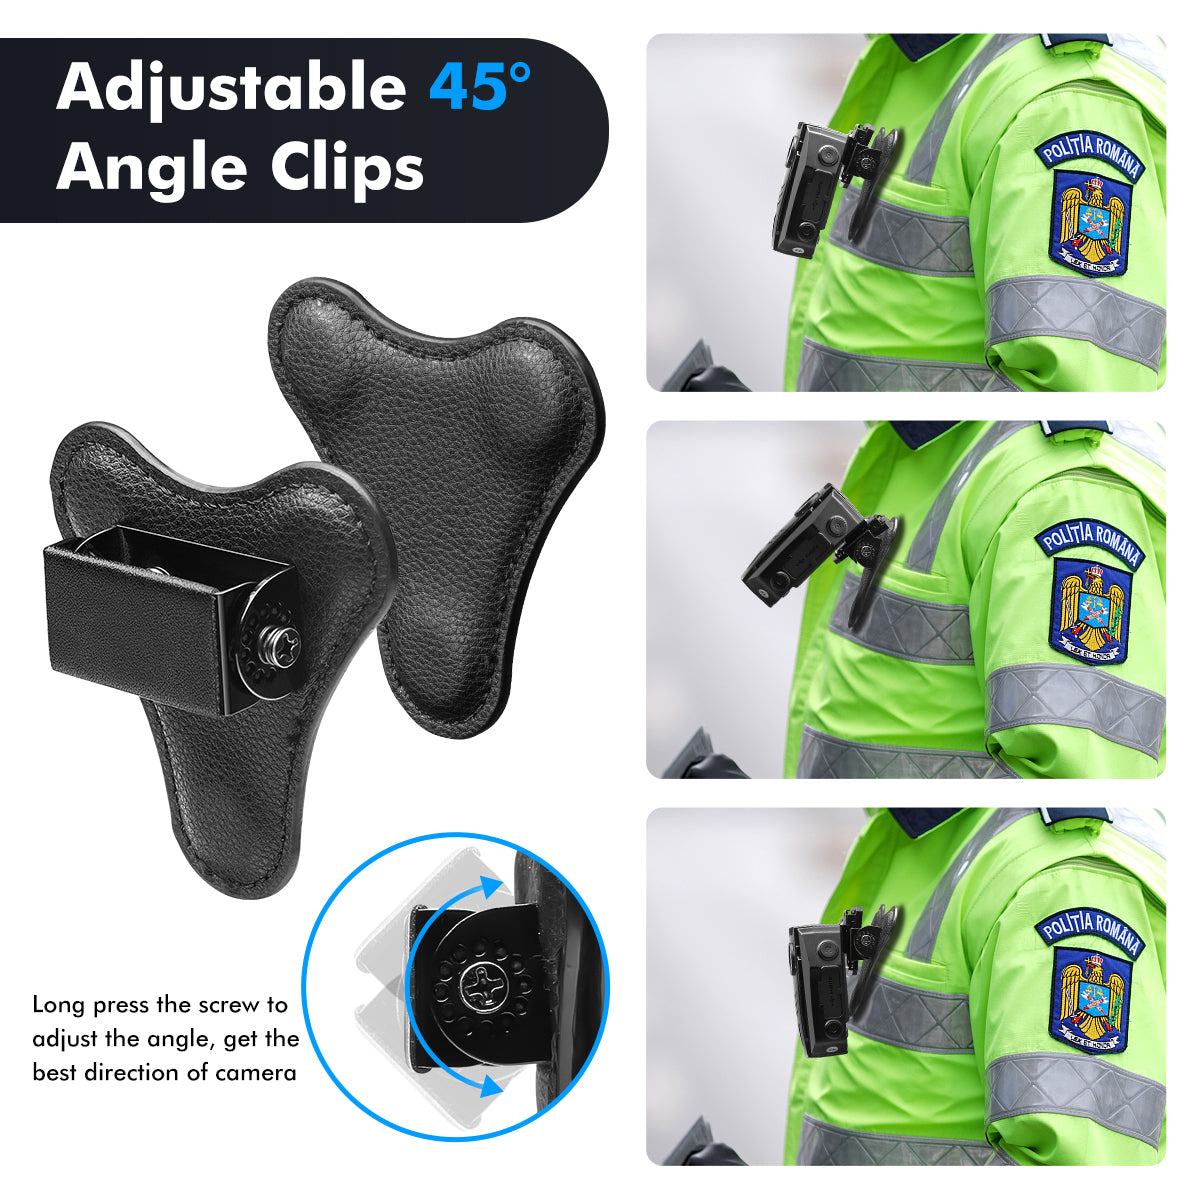 BOBLOV Body Camera Magnet Mount, Support 45° Angle Adjustable for Body Camera, 6 Strong Magnets, Universal Magnetic Suction Clip for All model Body Cameras, Make from Durable Leather, Stick to Clothes